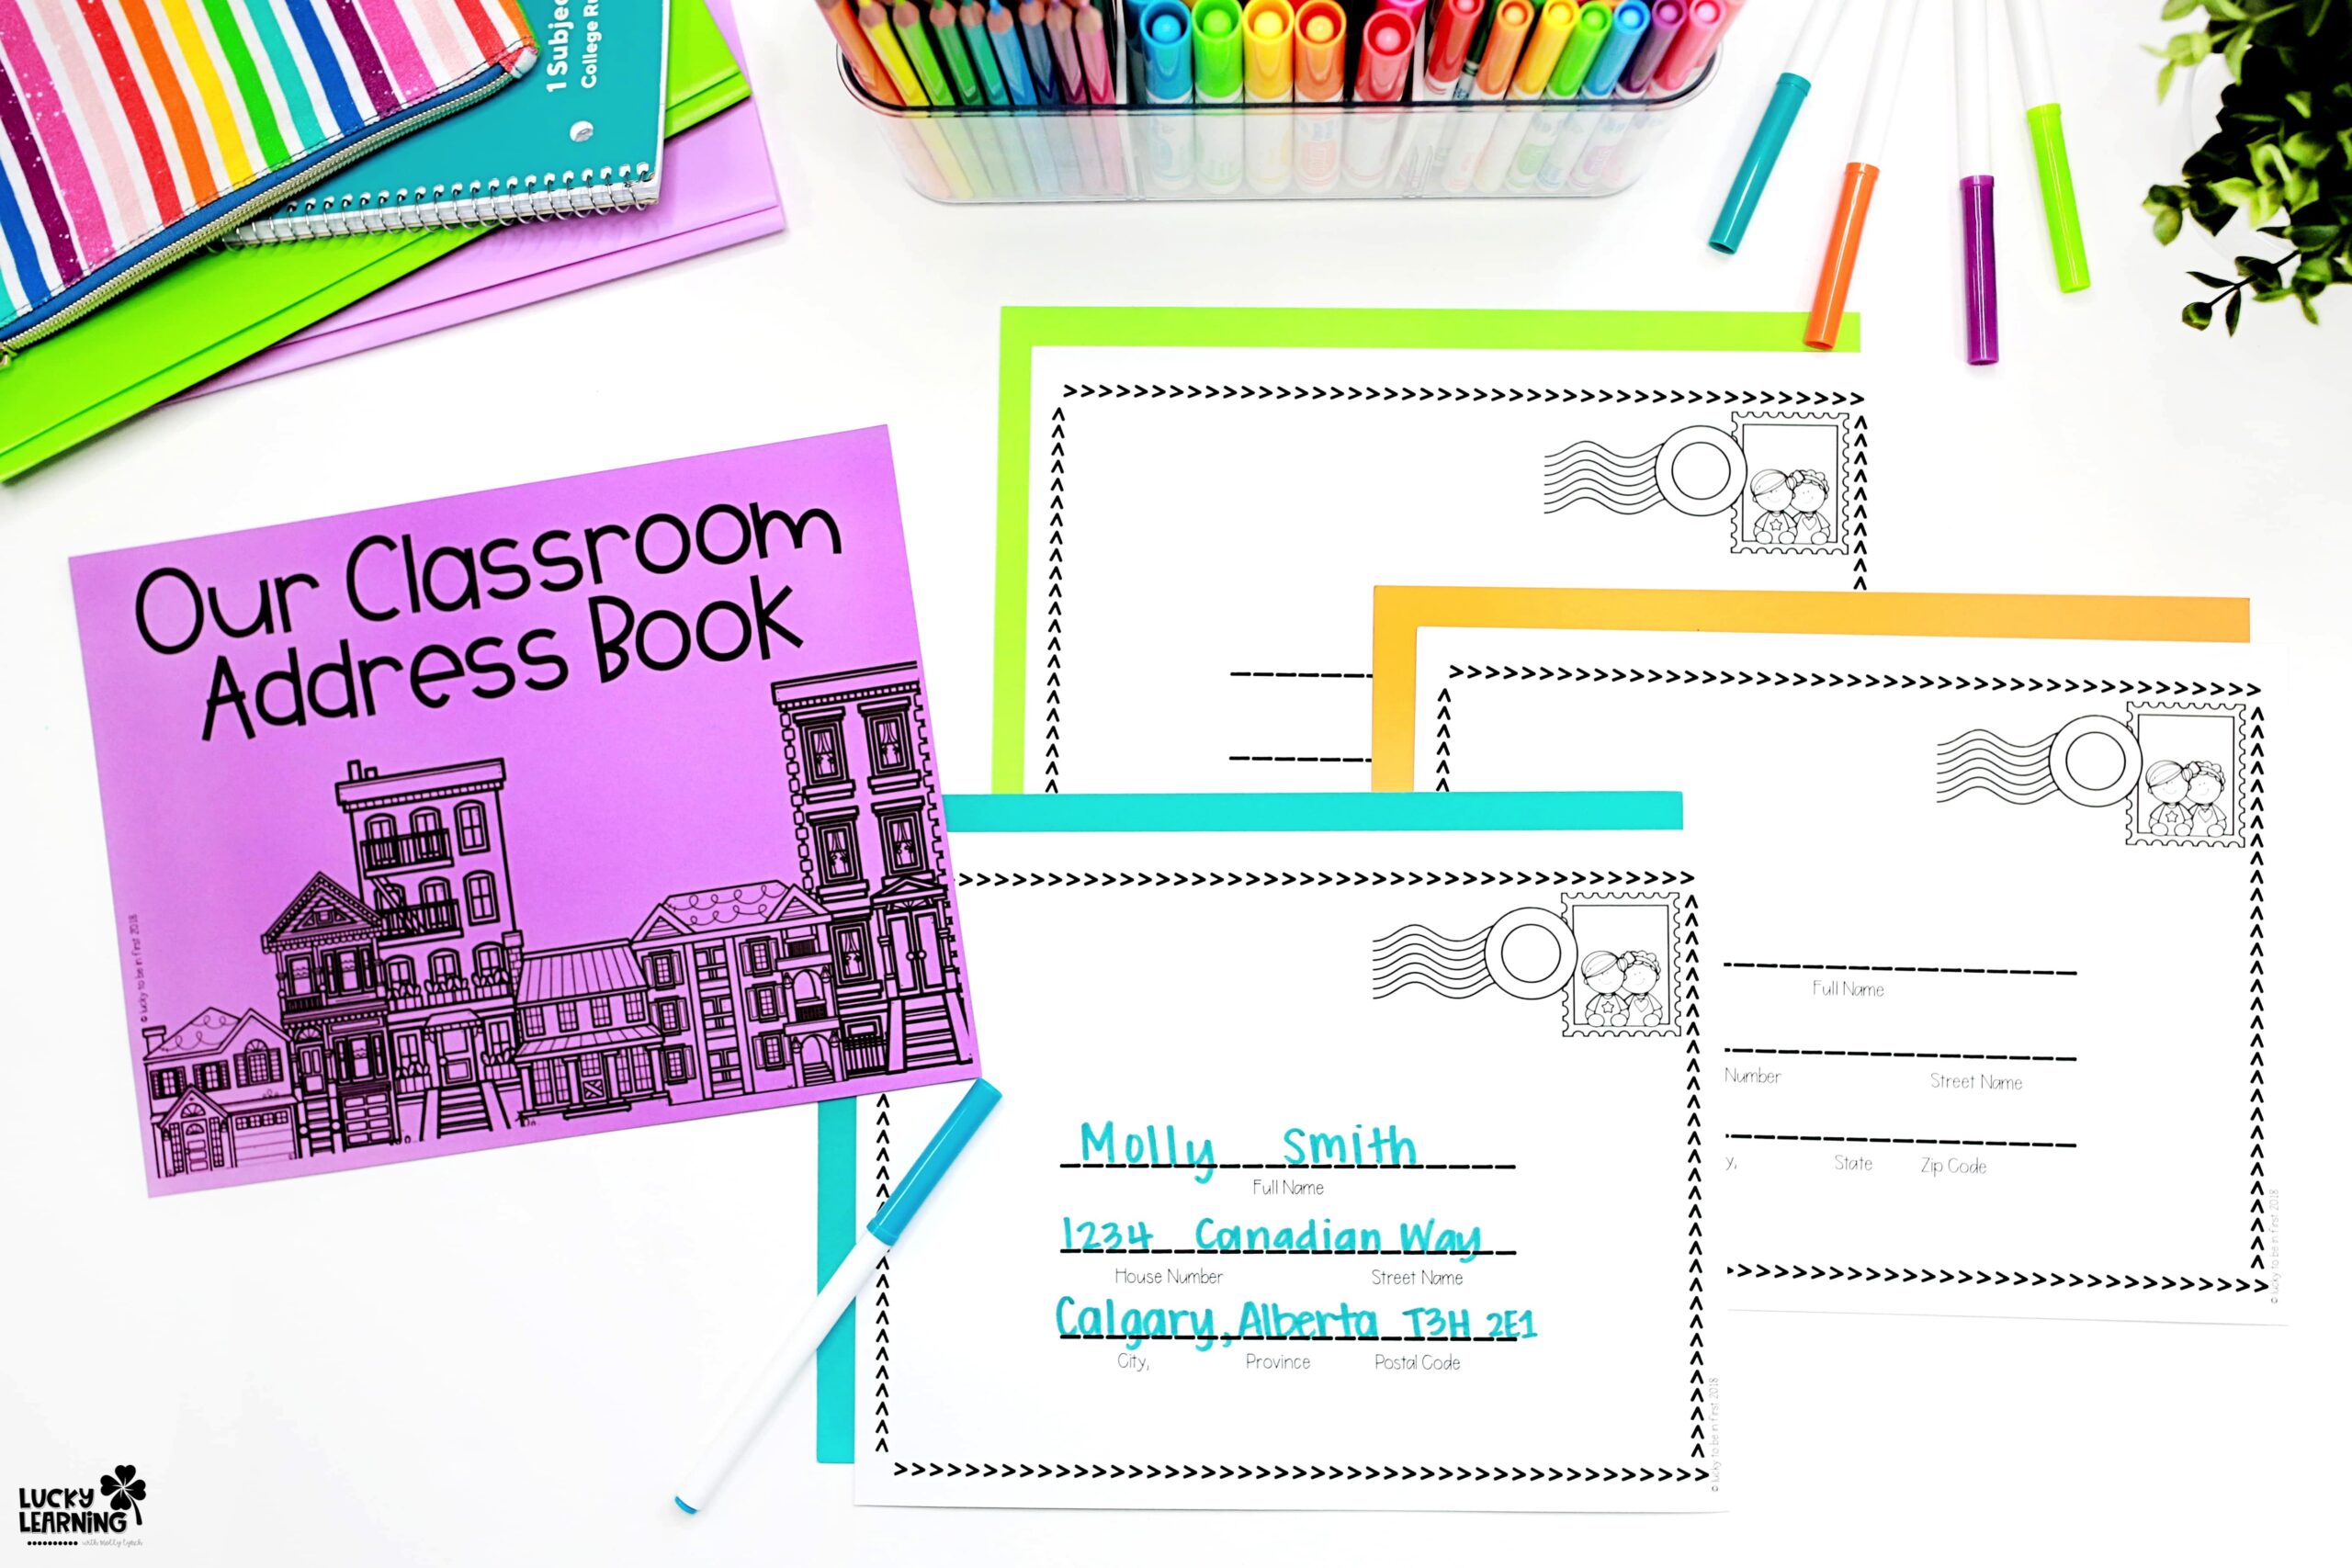 printable worksheet for helping students learn their address | Lucky Learning with Molly Lynch 